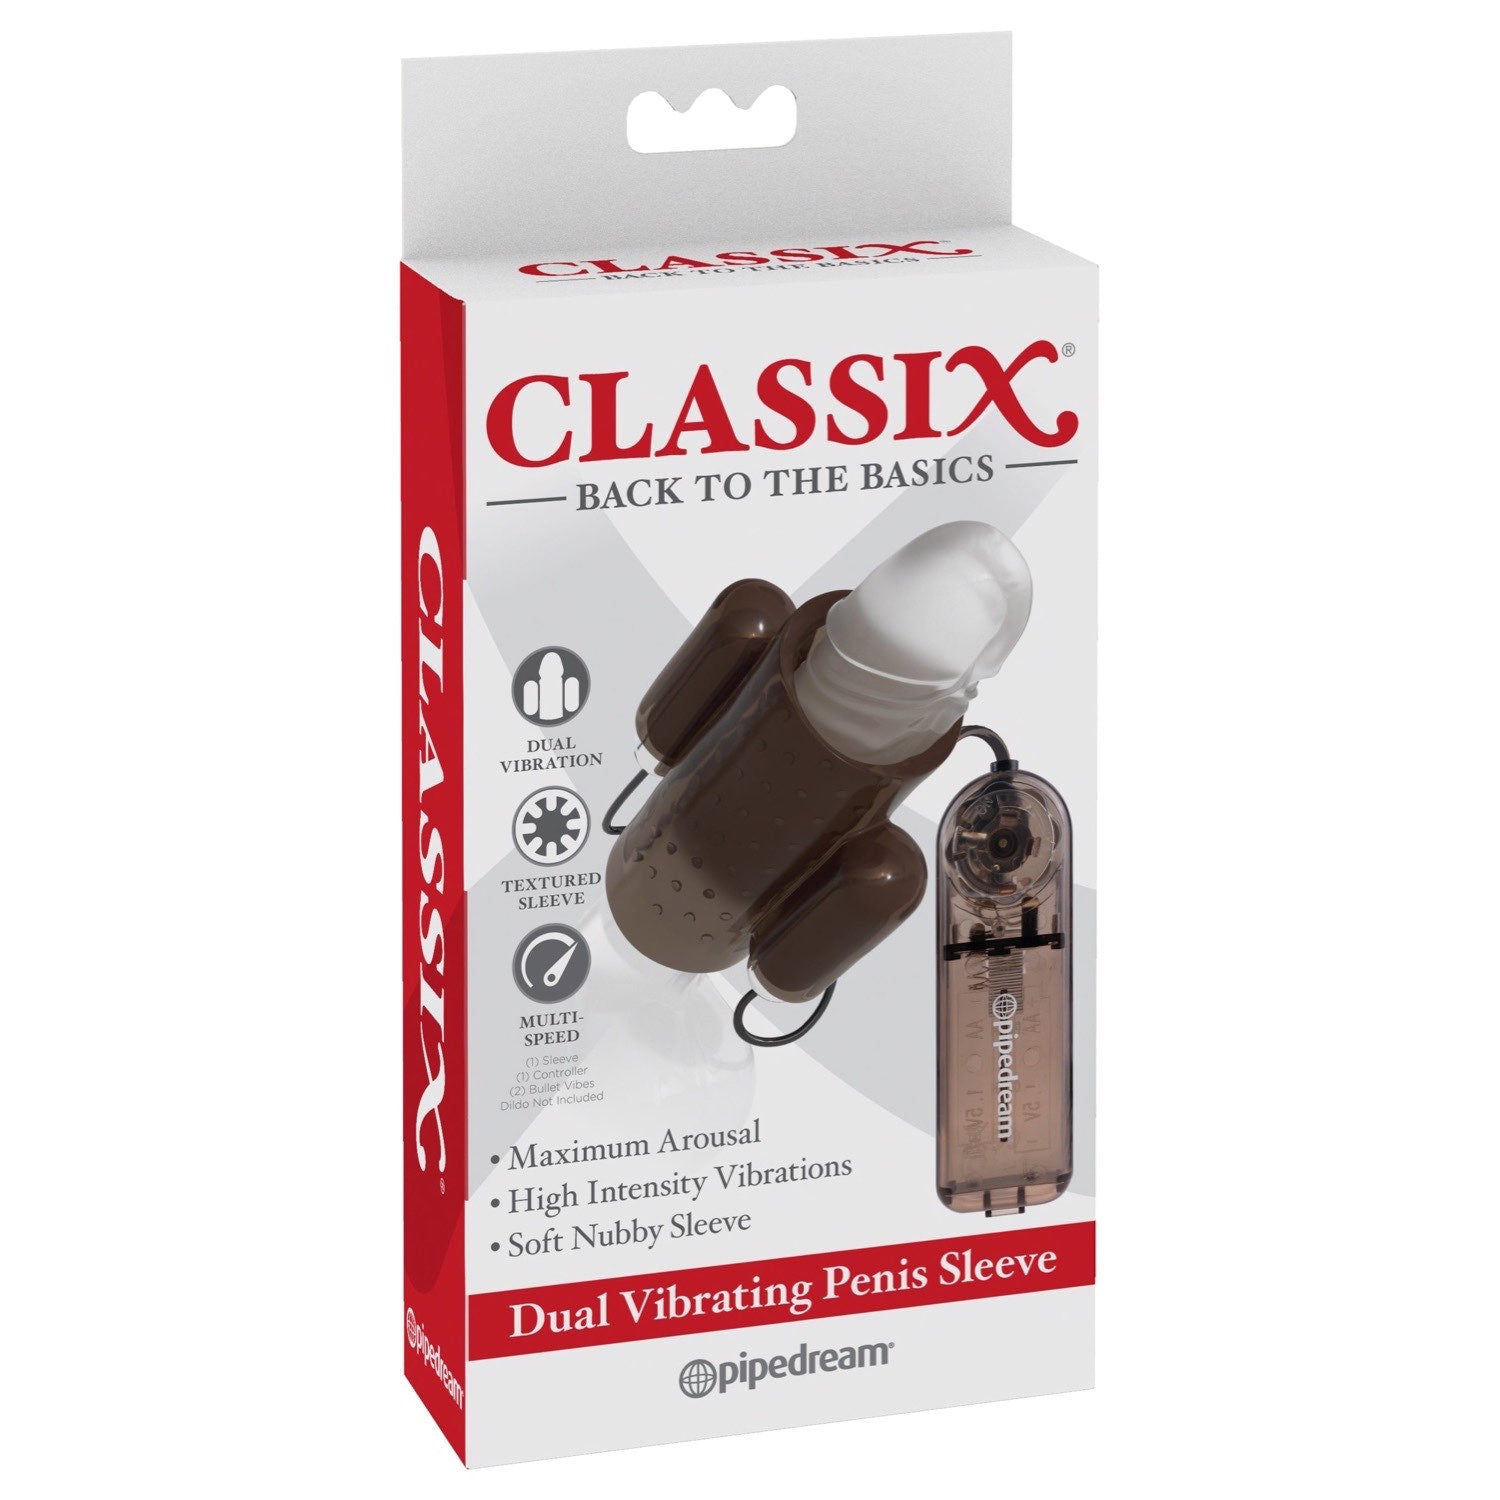 Classix Dual Vibrating Penis Sleeve - Smoke Vibrating Penis Sleeve by Pipedream